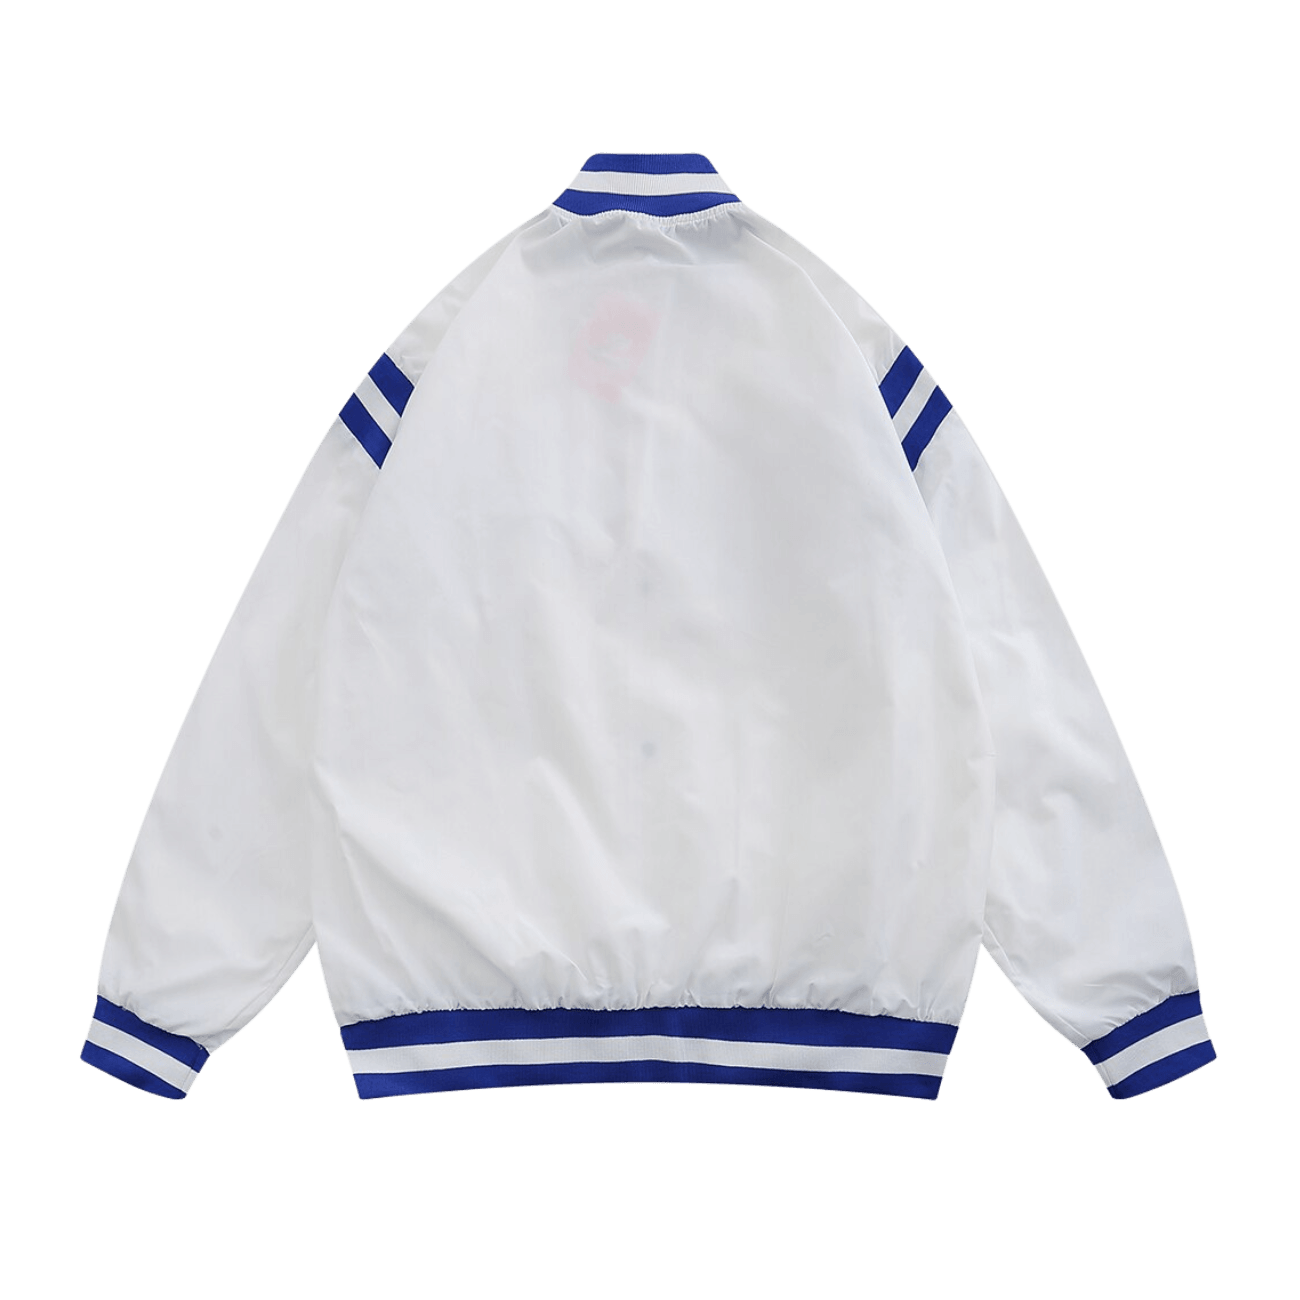 LUXENFY™ - Embroidery Letter Lightweight  Varsity Jackets luxenfy.com